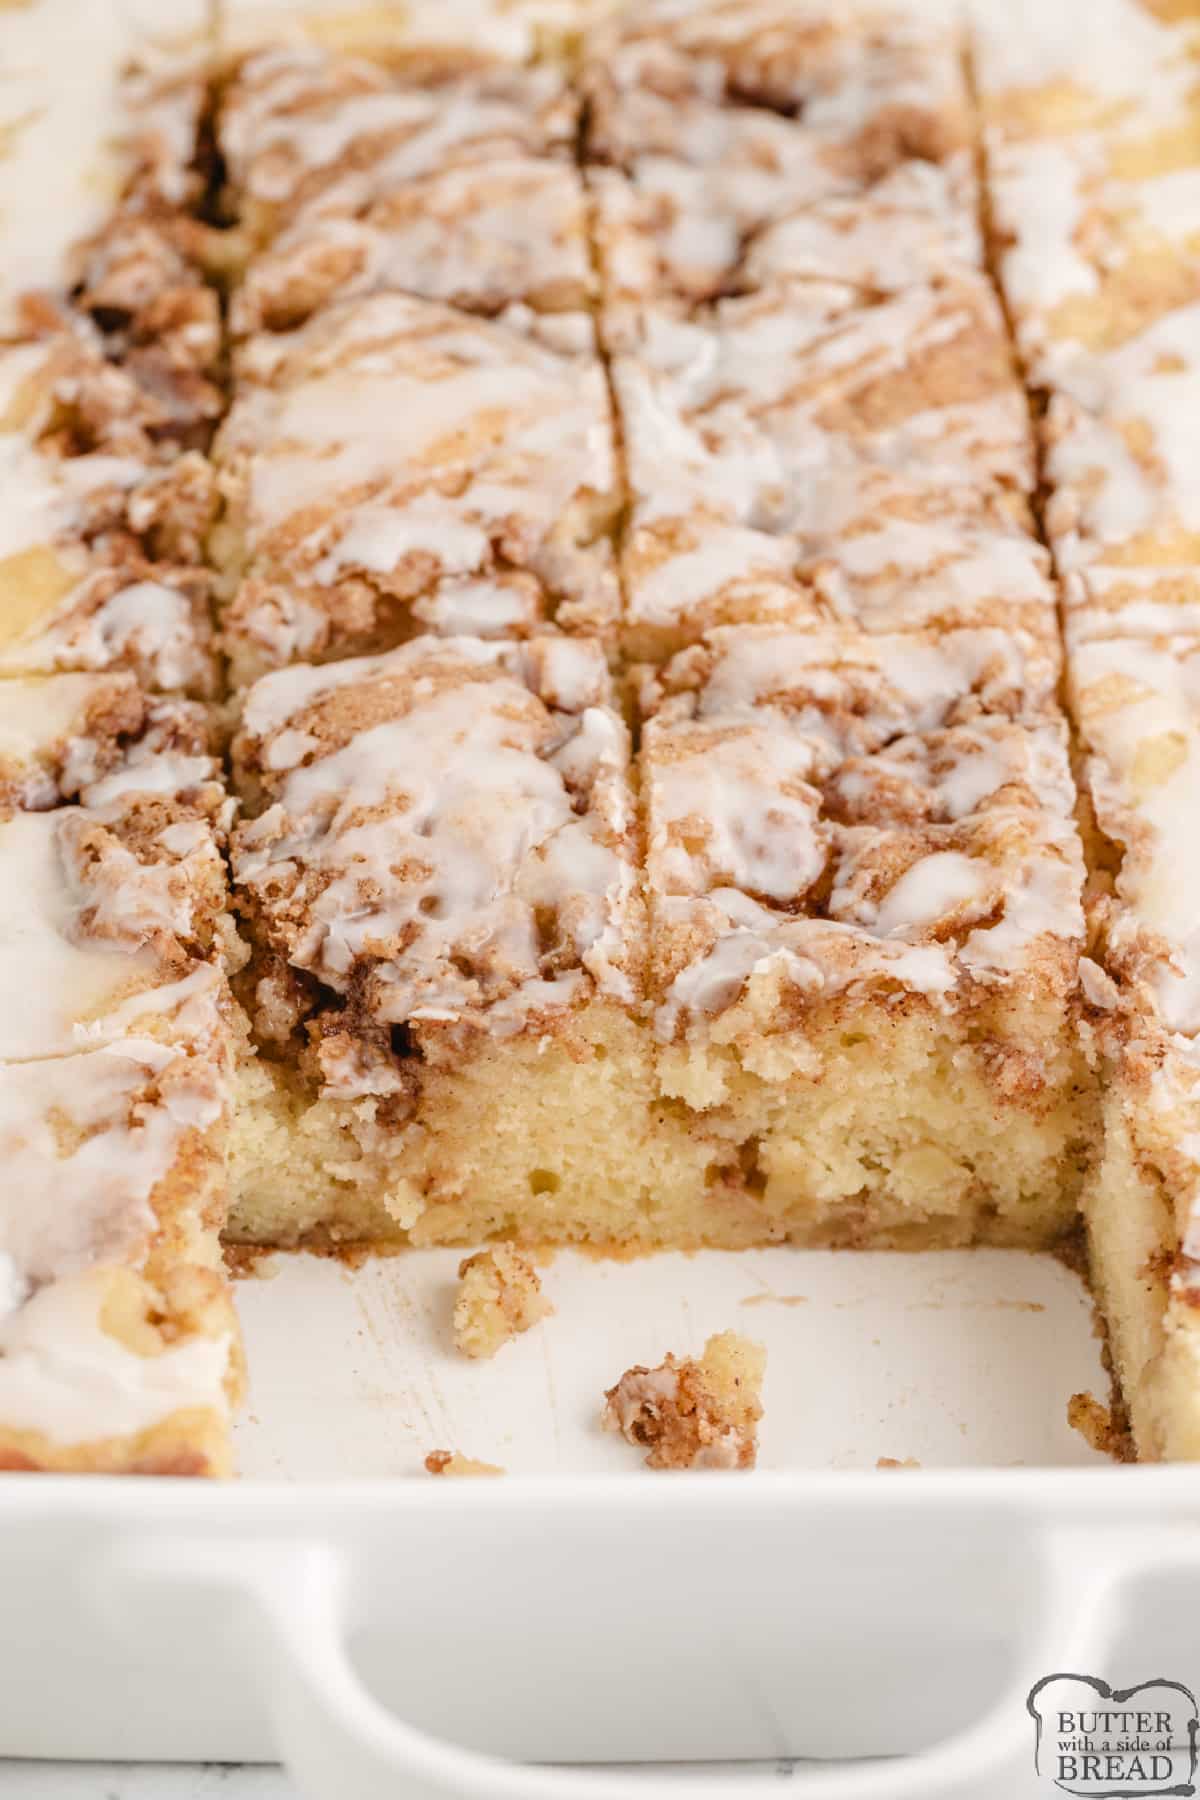 Apple cake with cinnamon crumb topping and glaze.